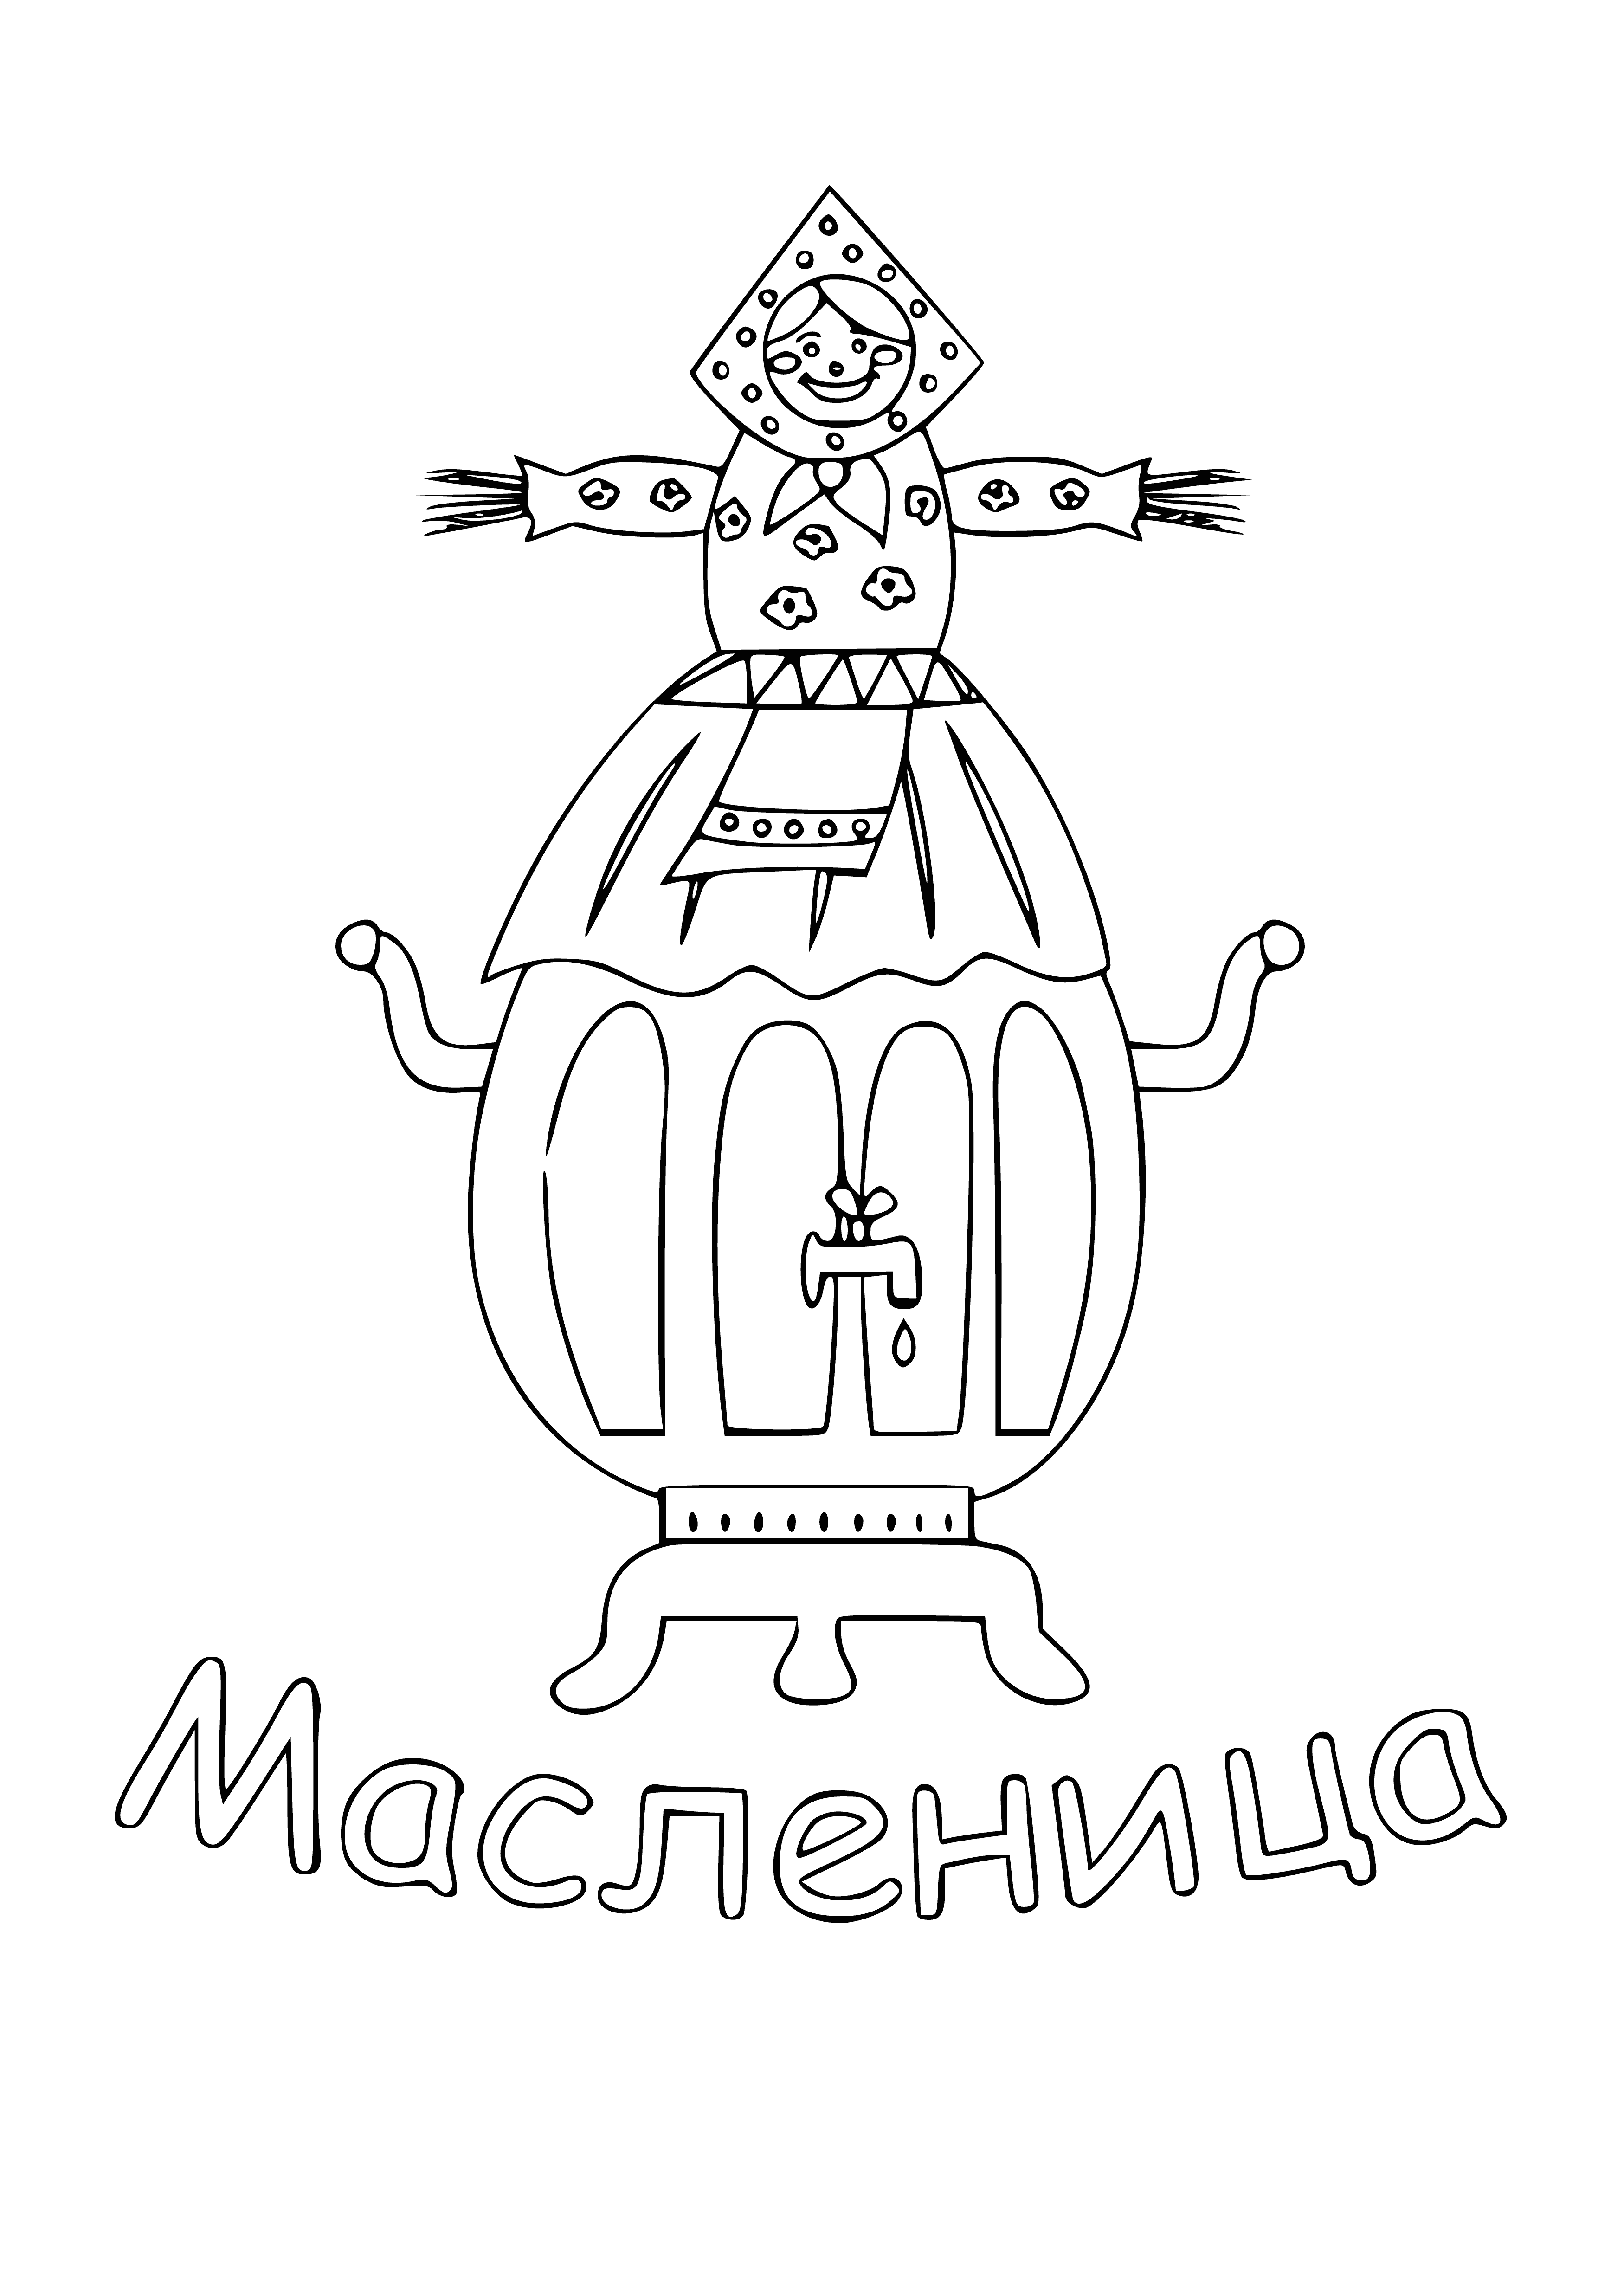 coloring page: Russian tradition: Pancake week or Maslenitsa celebrates the coming of spring with family, friends, tea & pancakes. Symbolically ending with burning of effigy of Lady Maslenitsa representing end of winter.